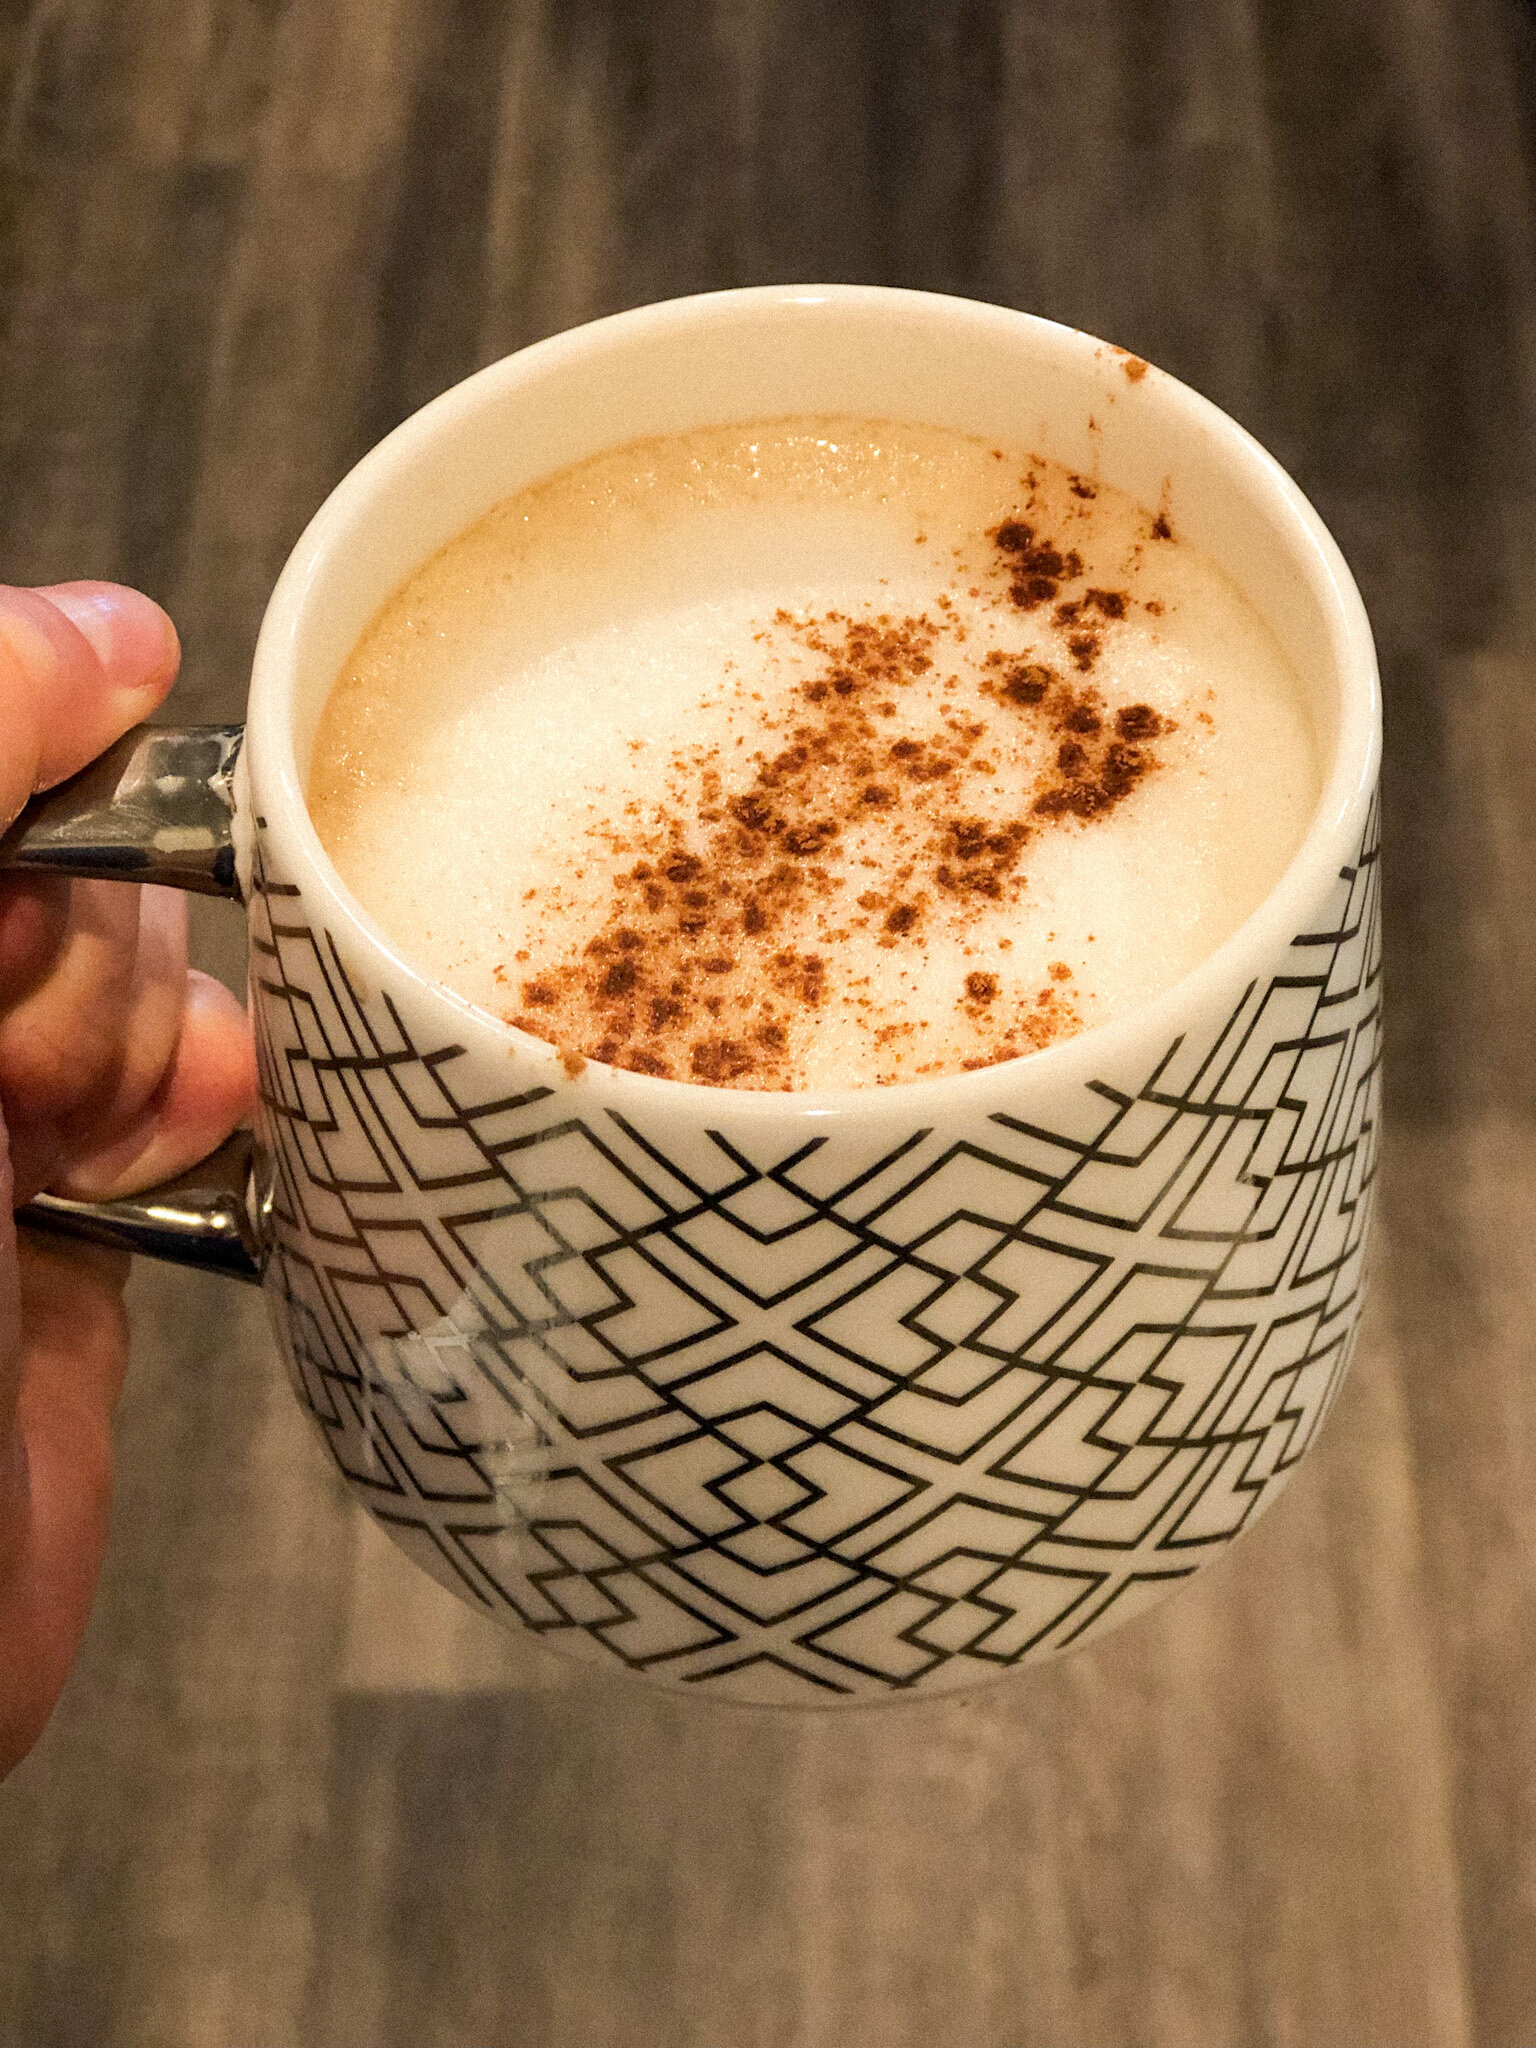 Pro tip! Add cinnamon to your coffee for flavor and goodness!